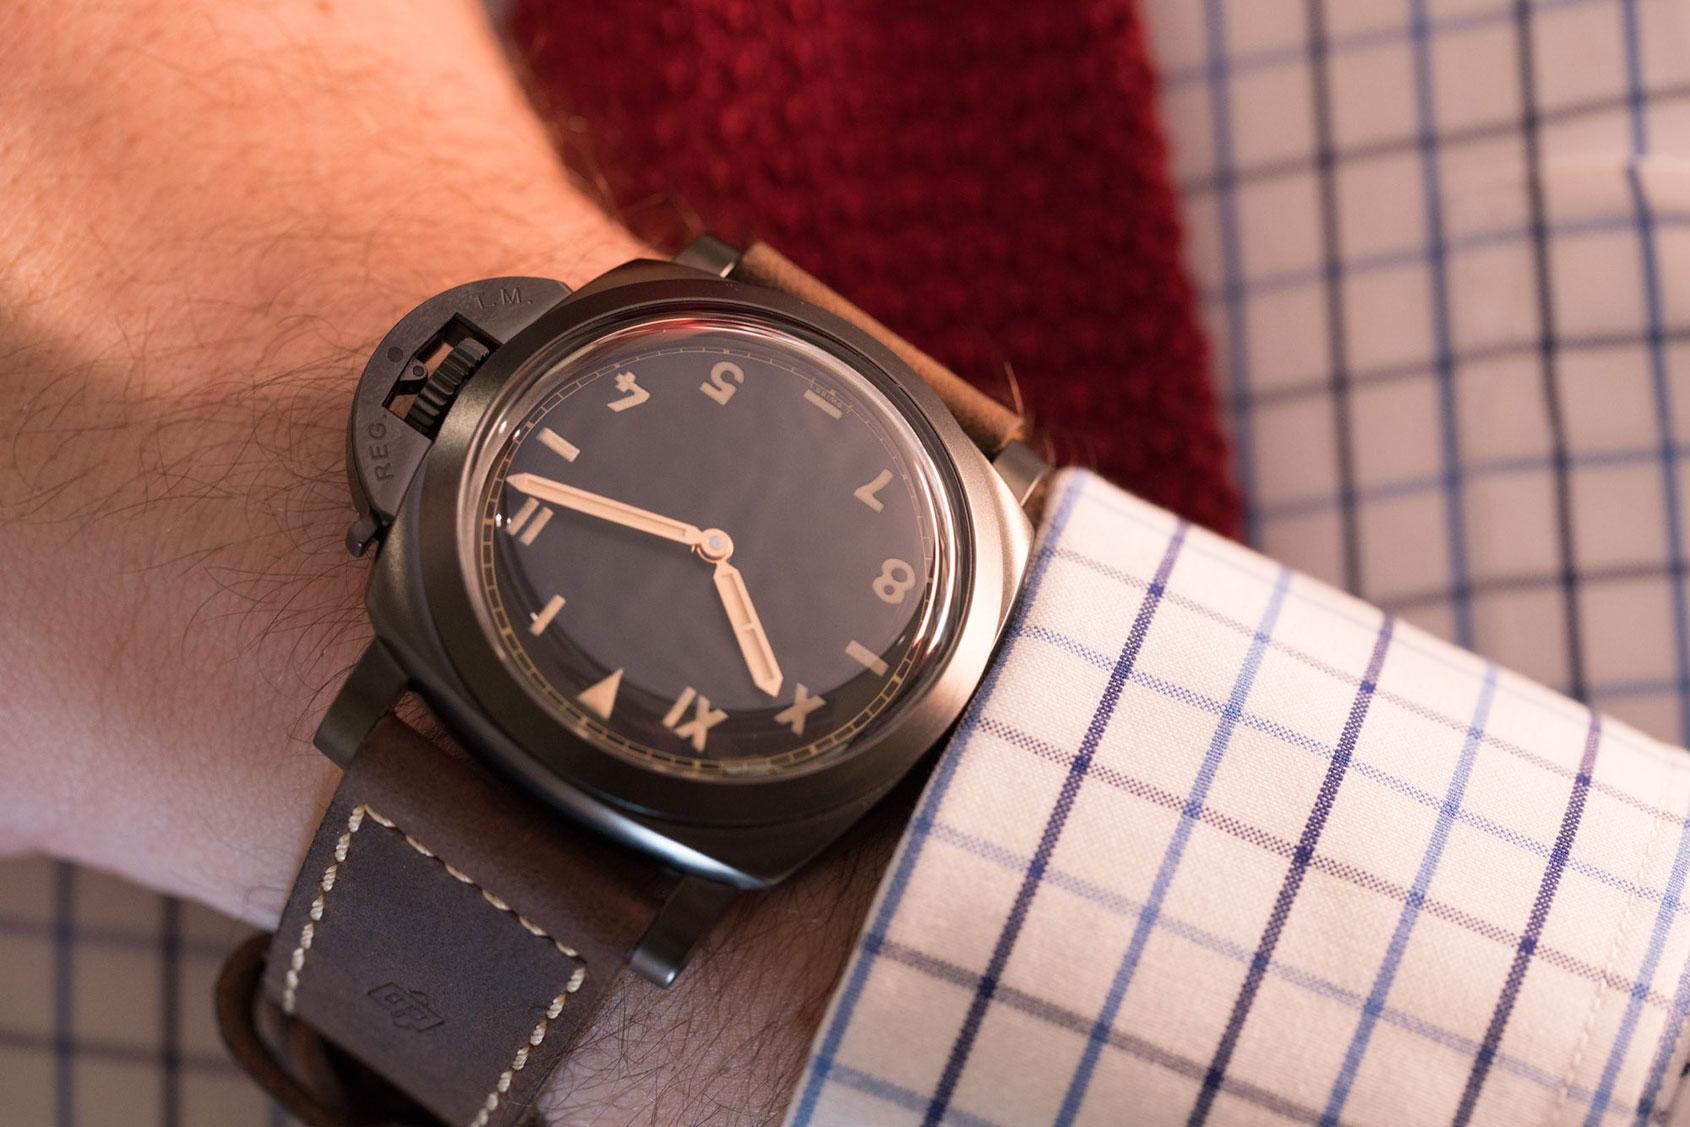 EDITOR’S PICK: Going back to Cali with the Panerai PAM 629 video review